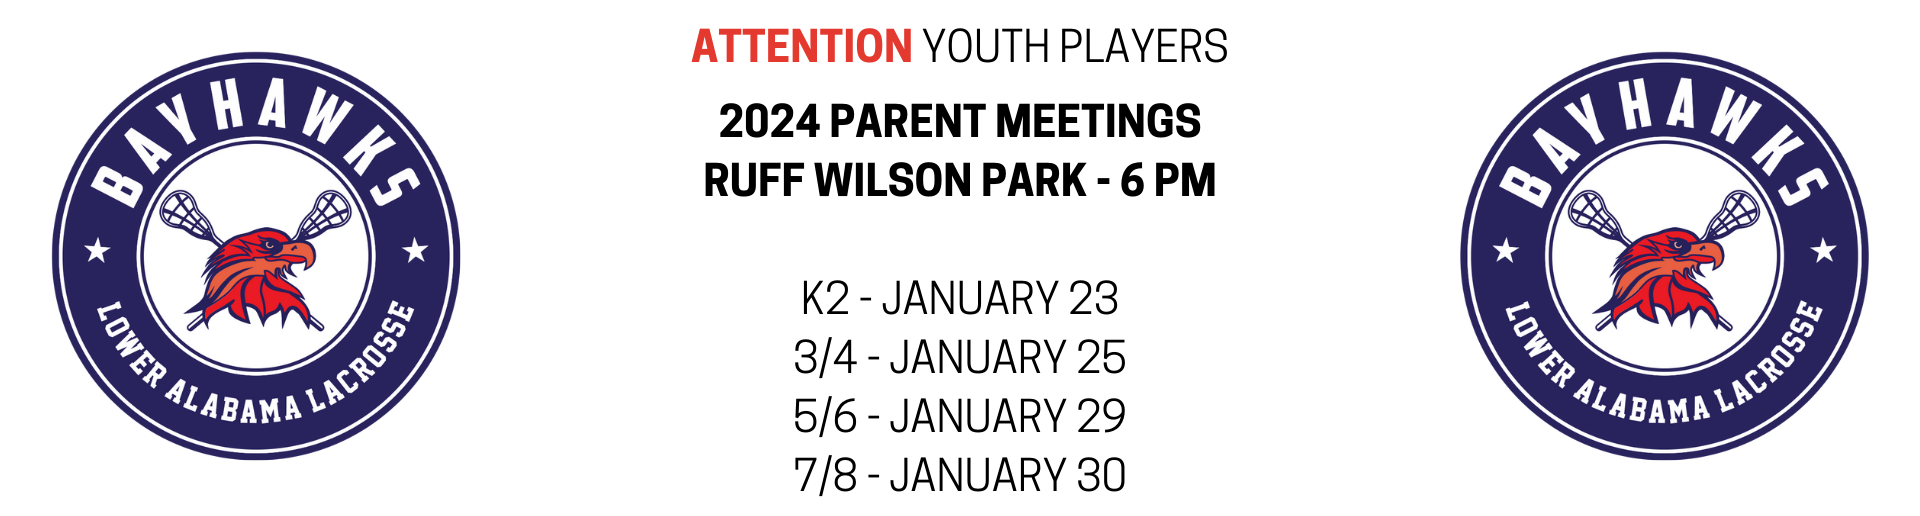 YOUTH PARENT MEETINGS